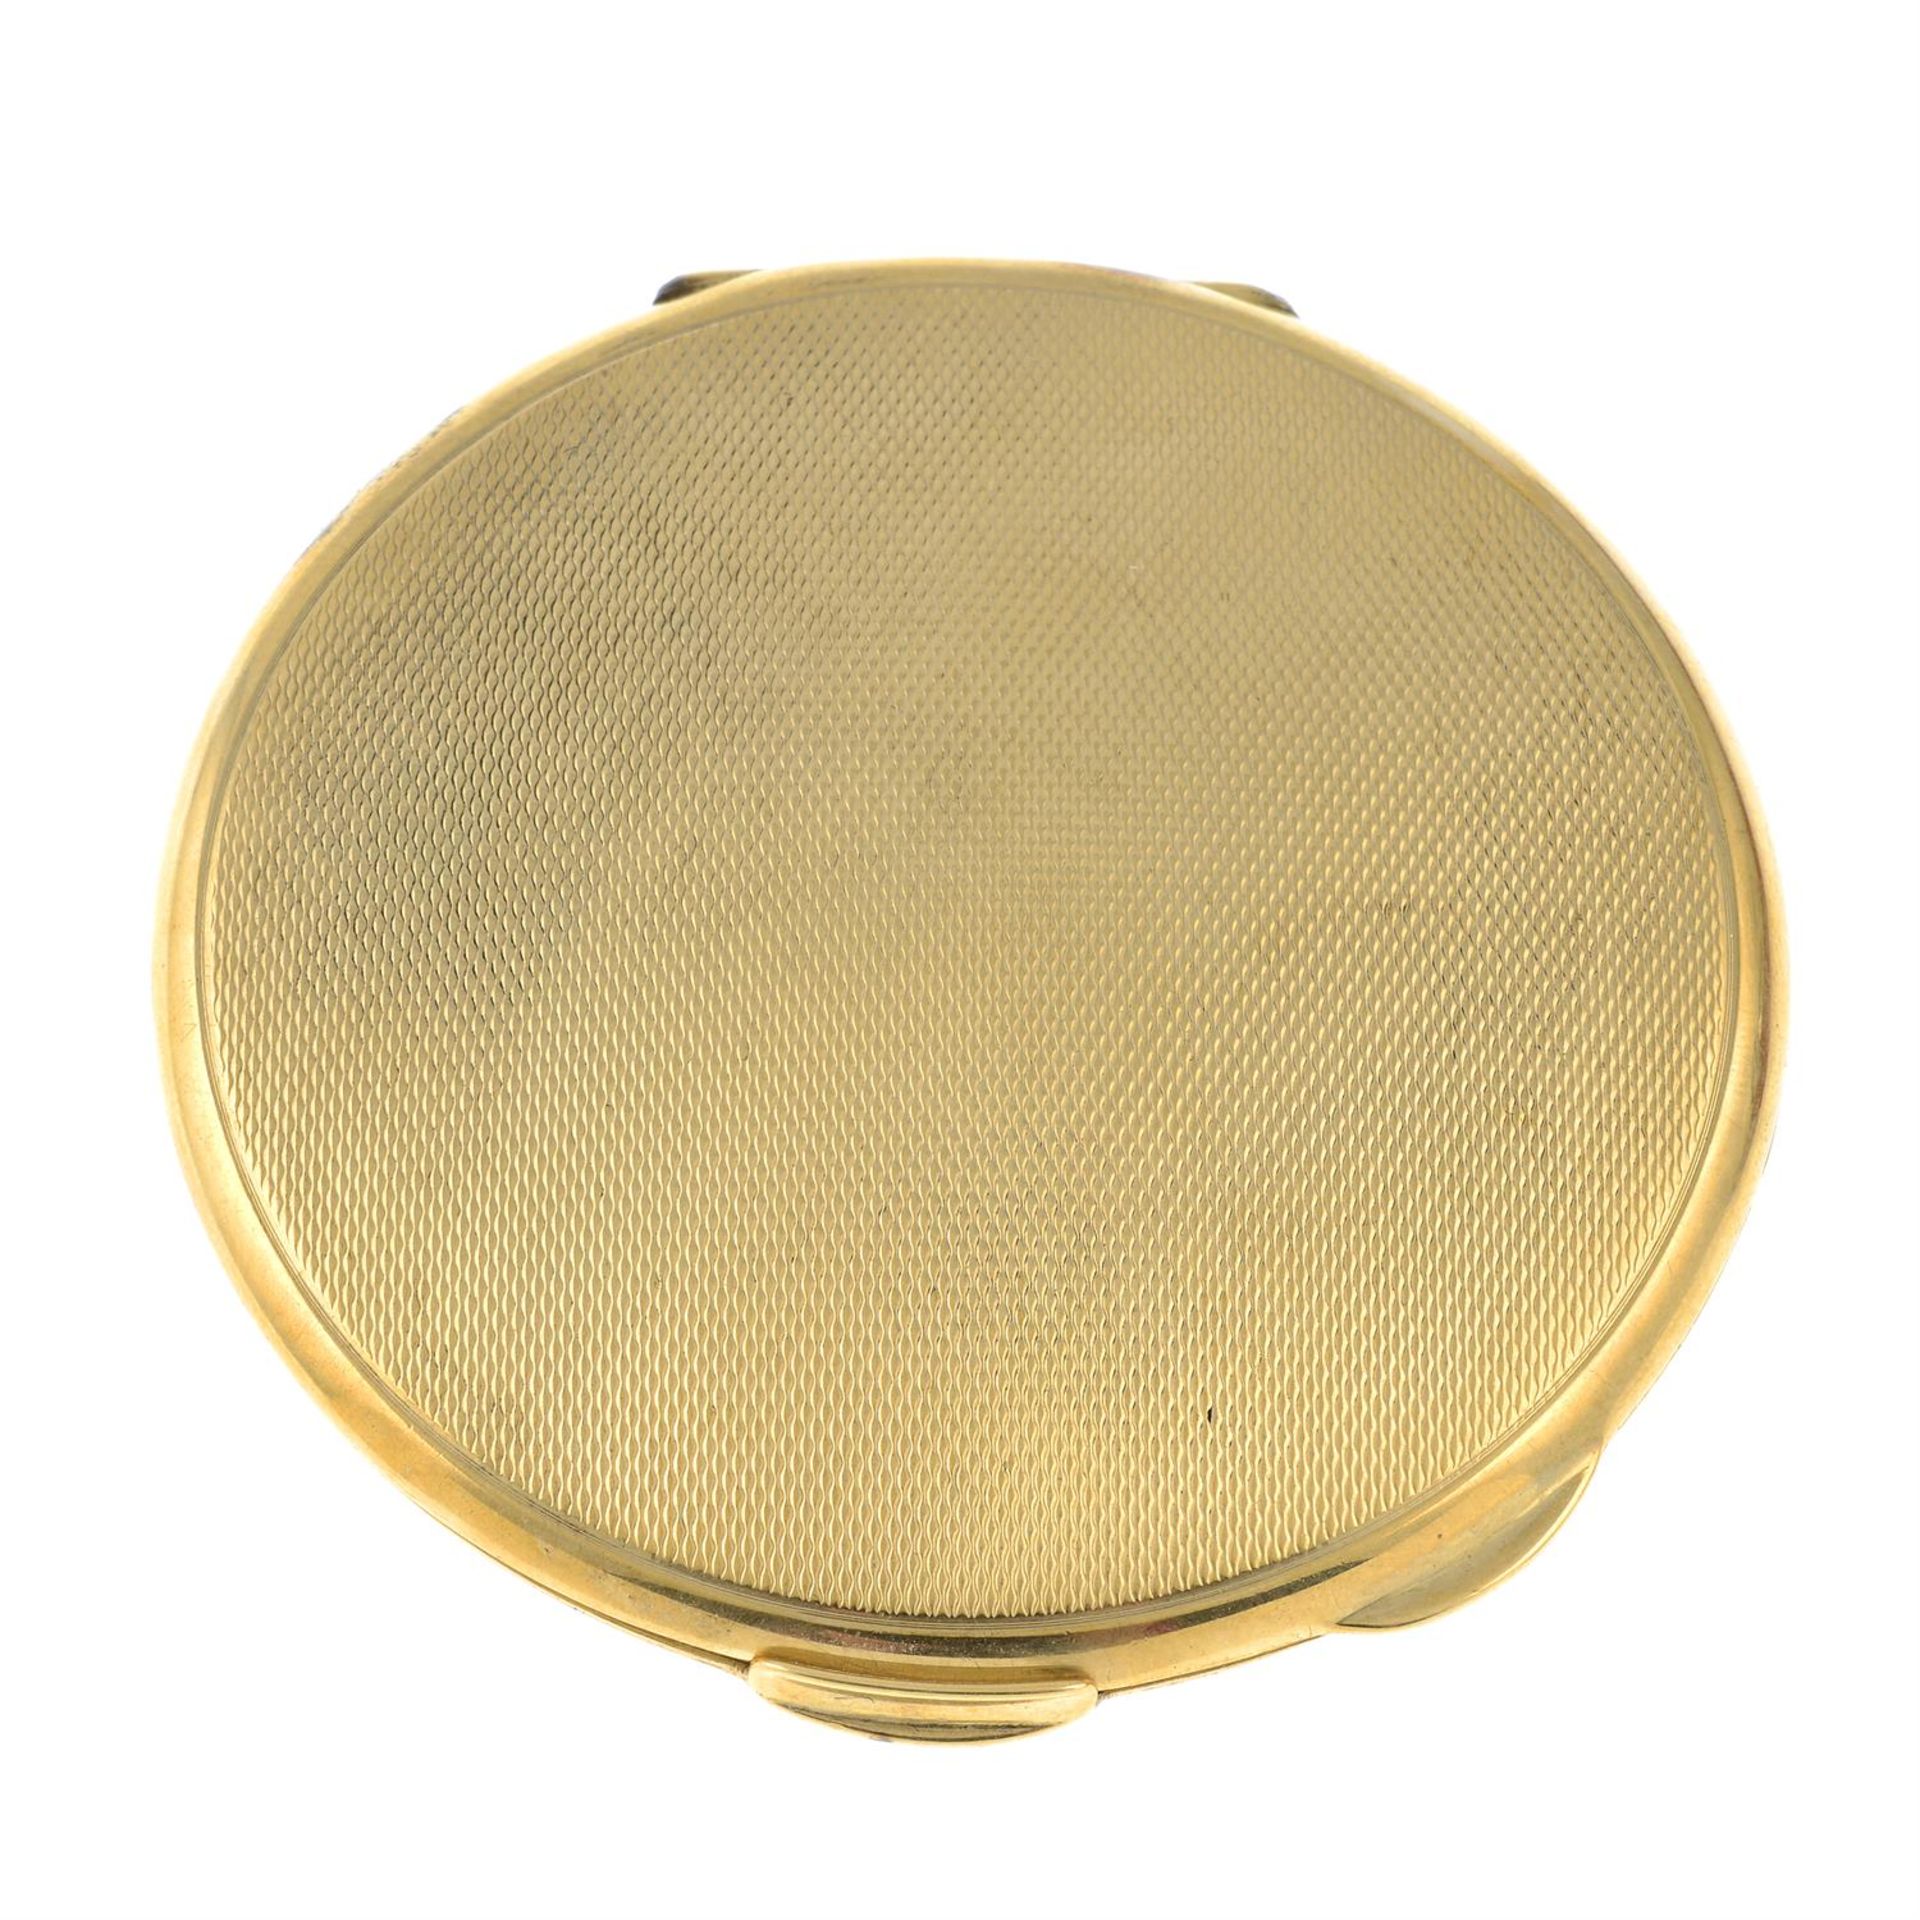 An early 20th century 9ct gold powder compact.